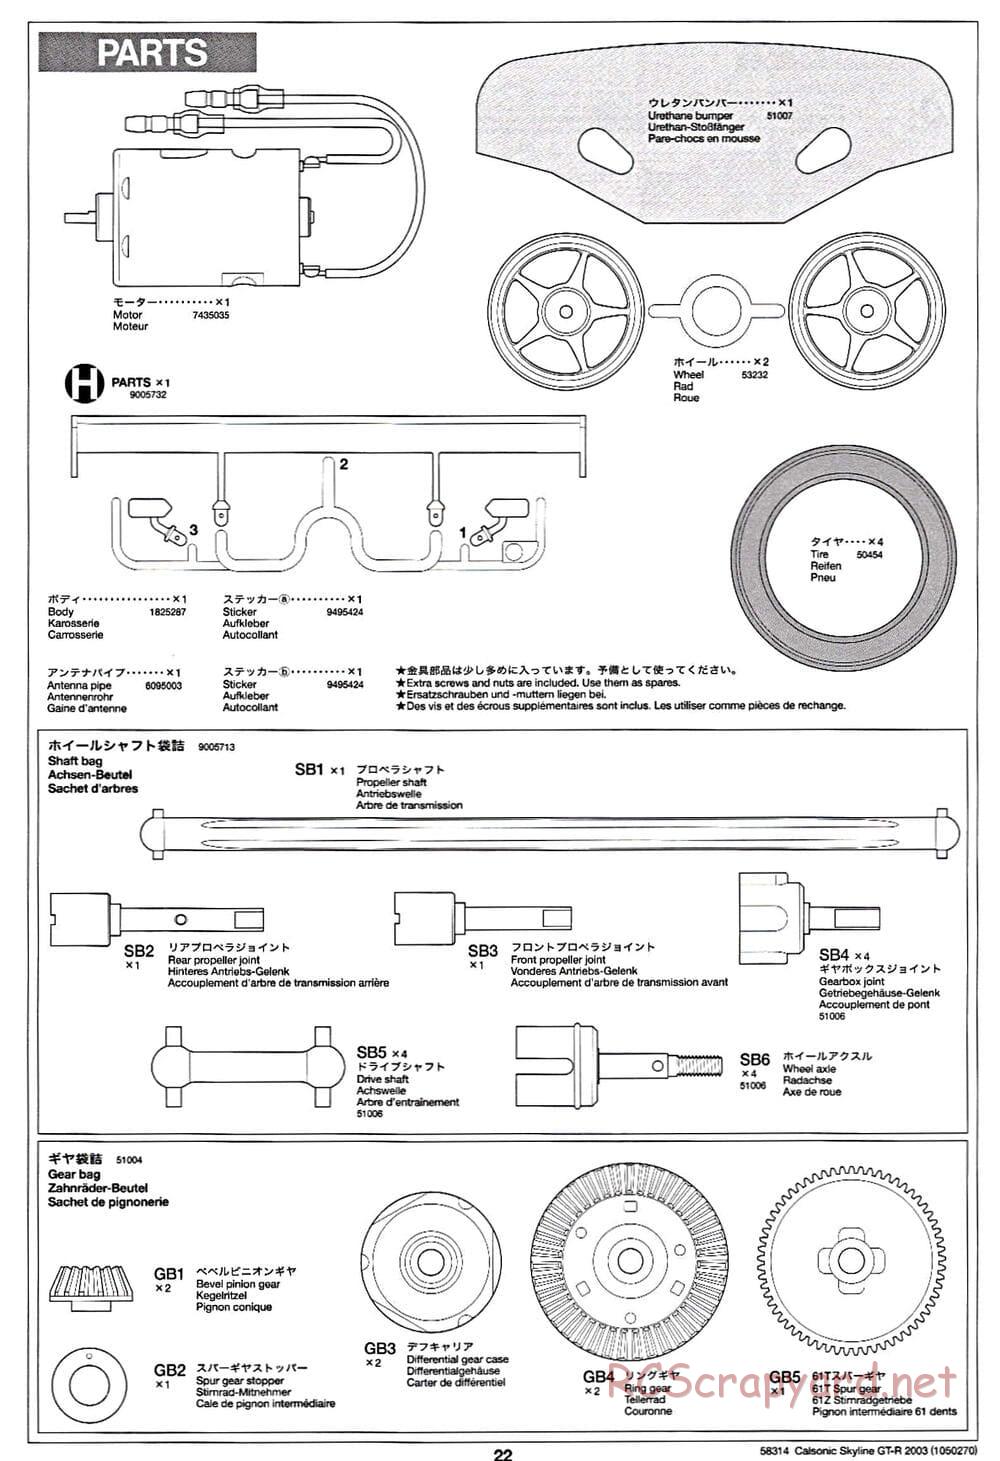 Tamiya - Calsonic Skyline GT-R 2003 - TT-01 Chassis - Manual - Page 22